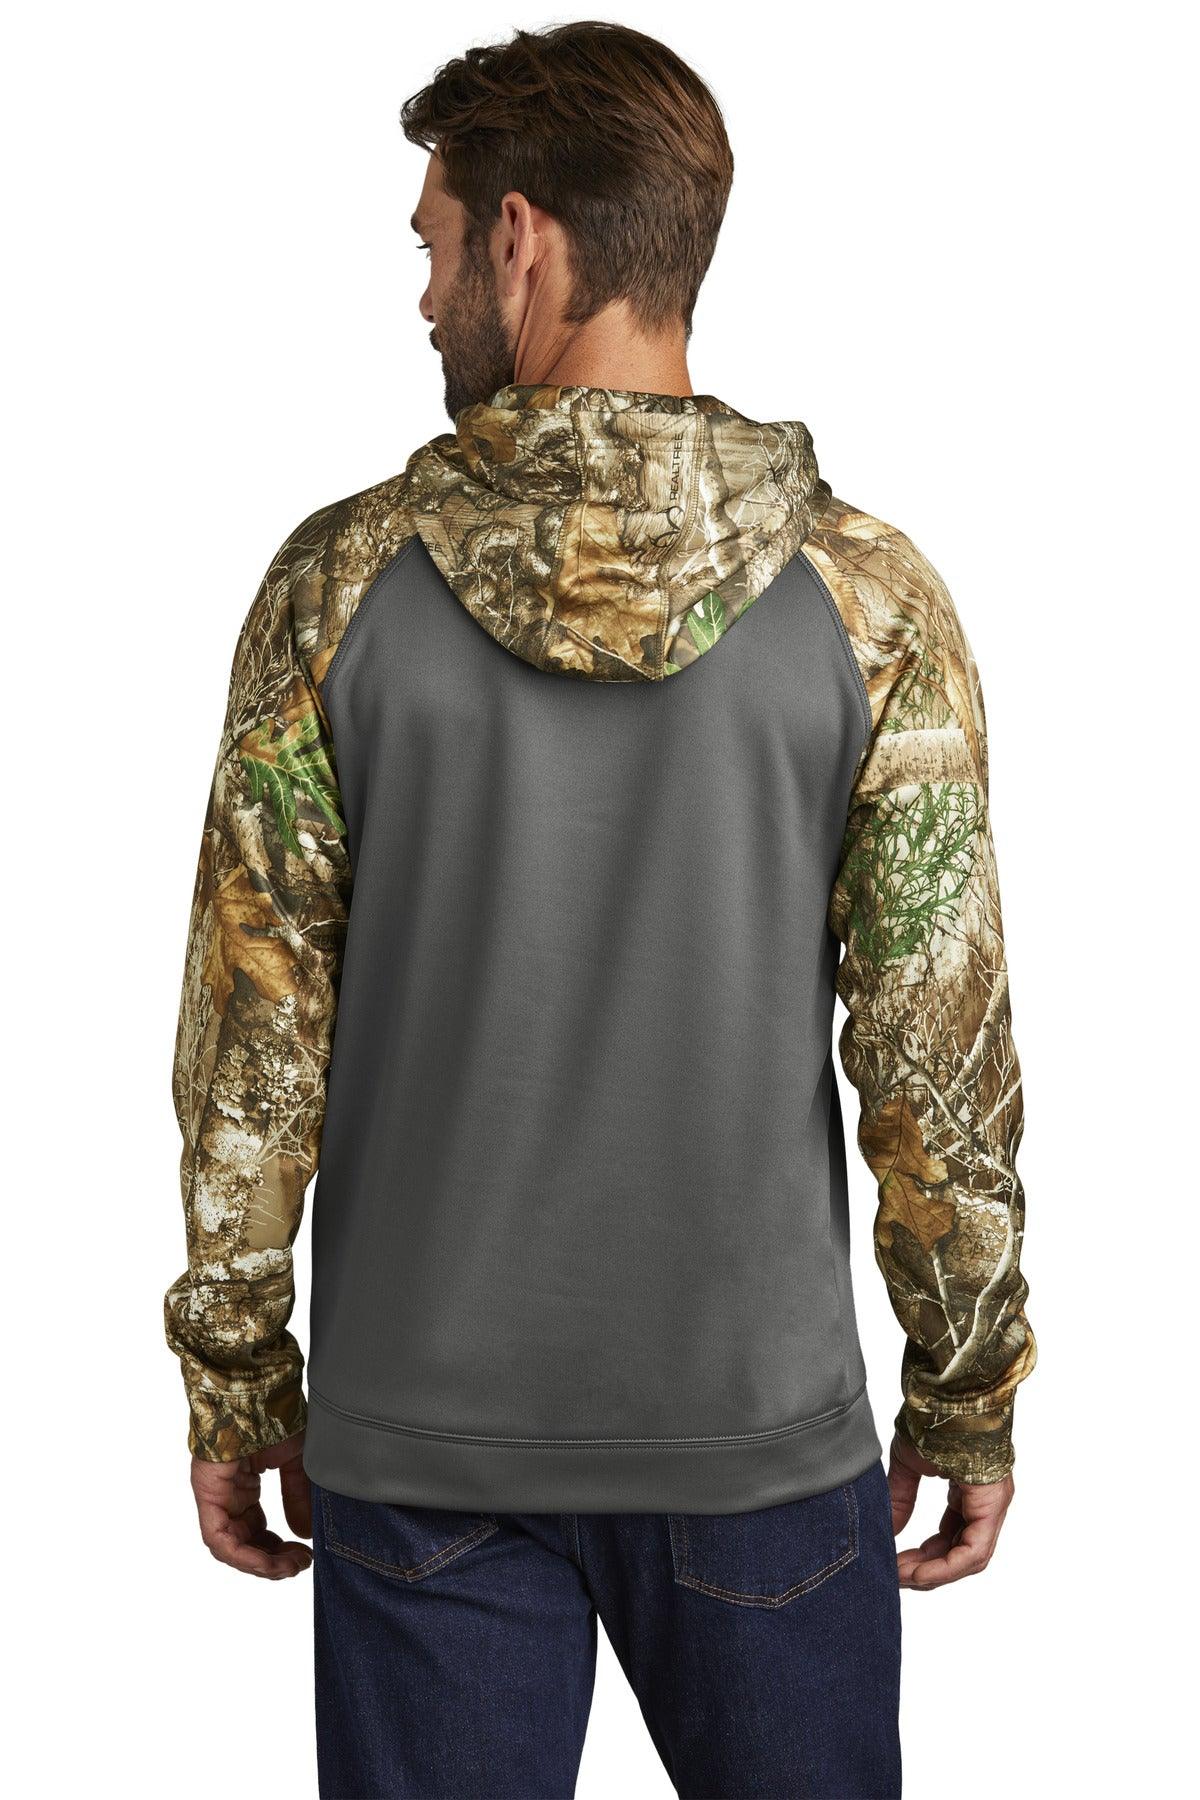 Russell Outdoors Realtree Performance Colorblock Pullover Hoodie RU451 - Dresses Max